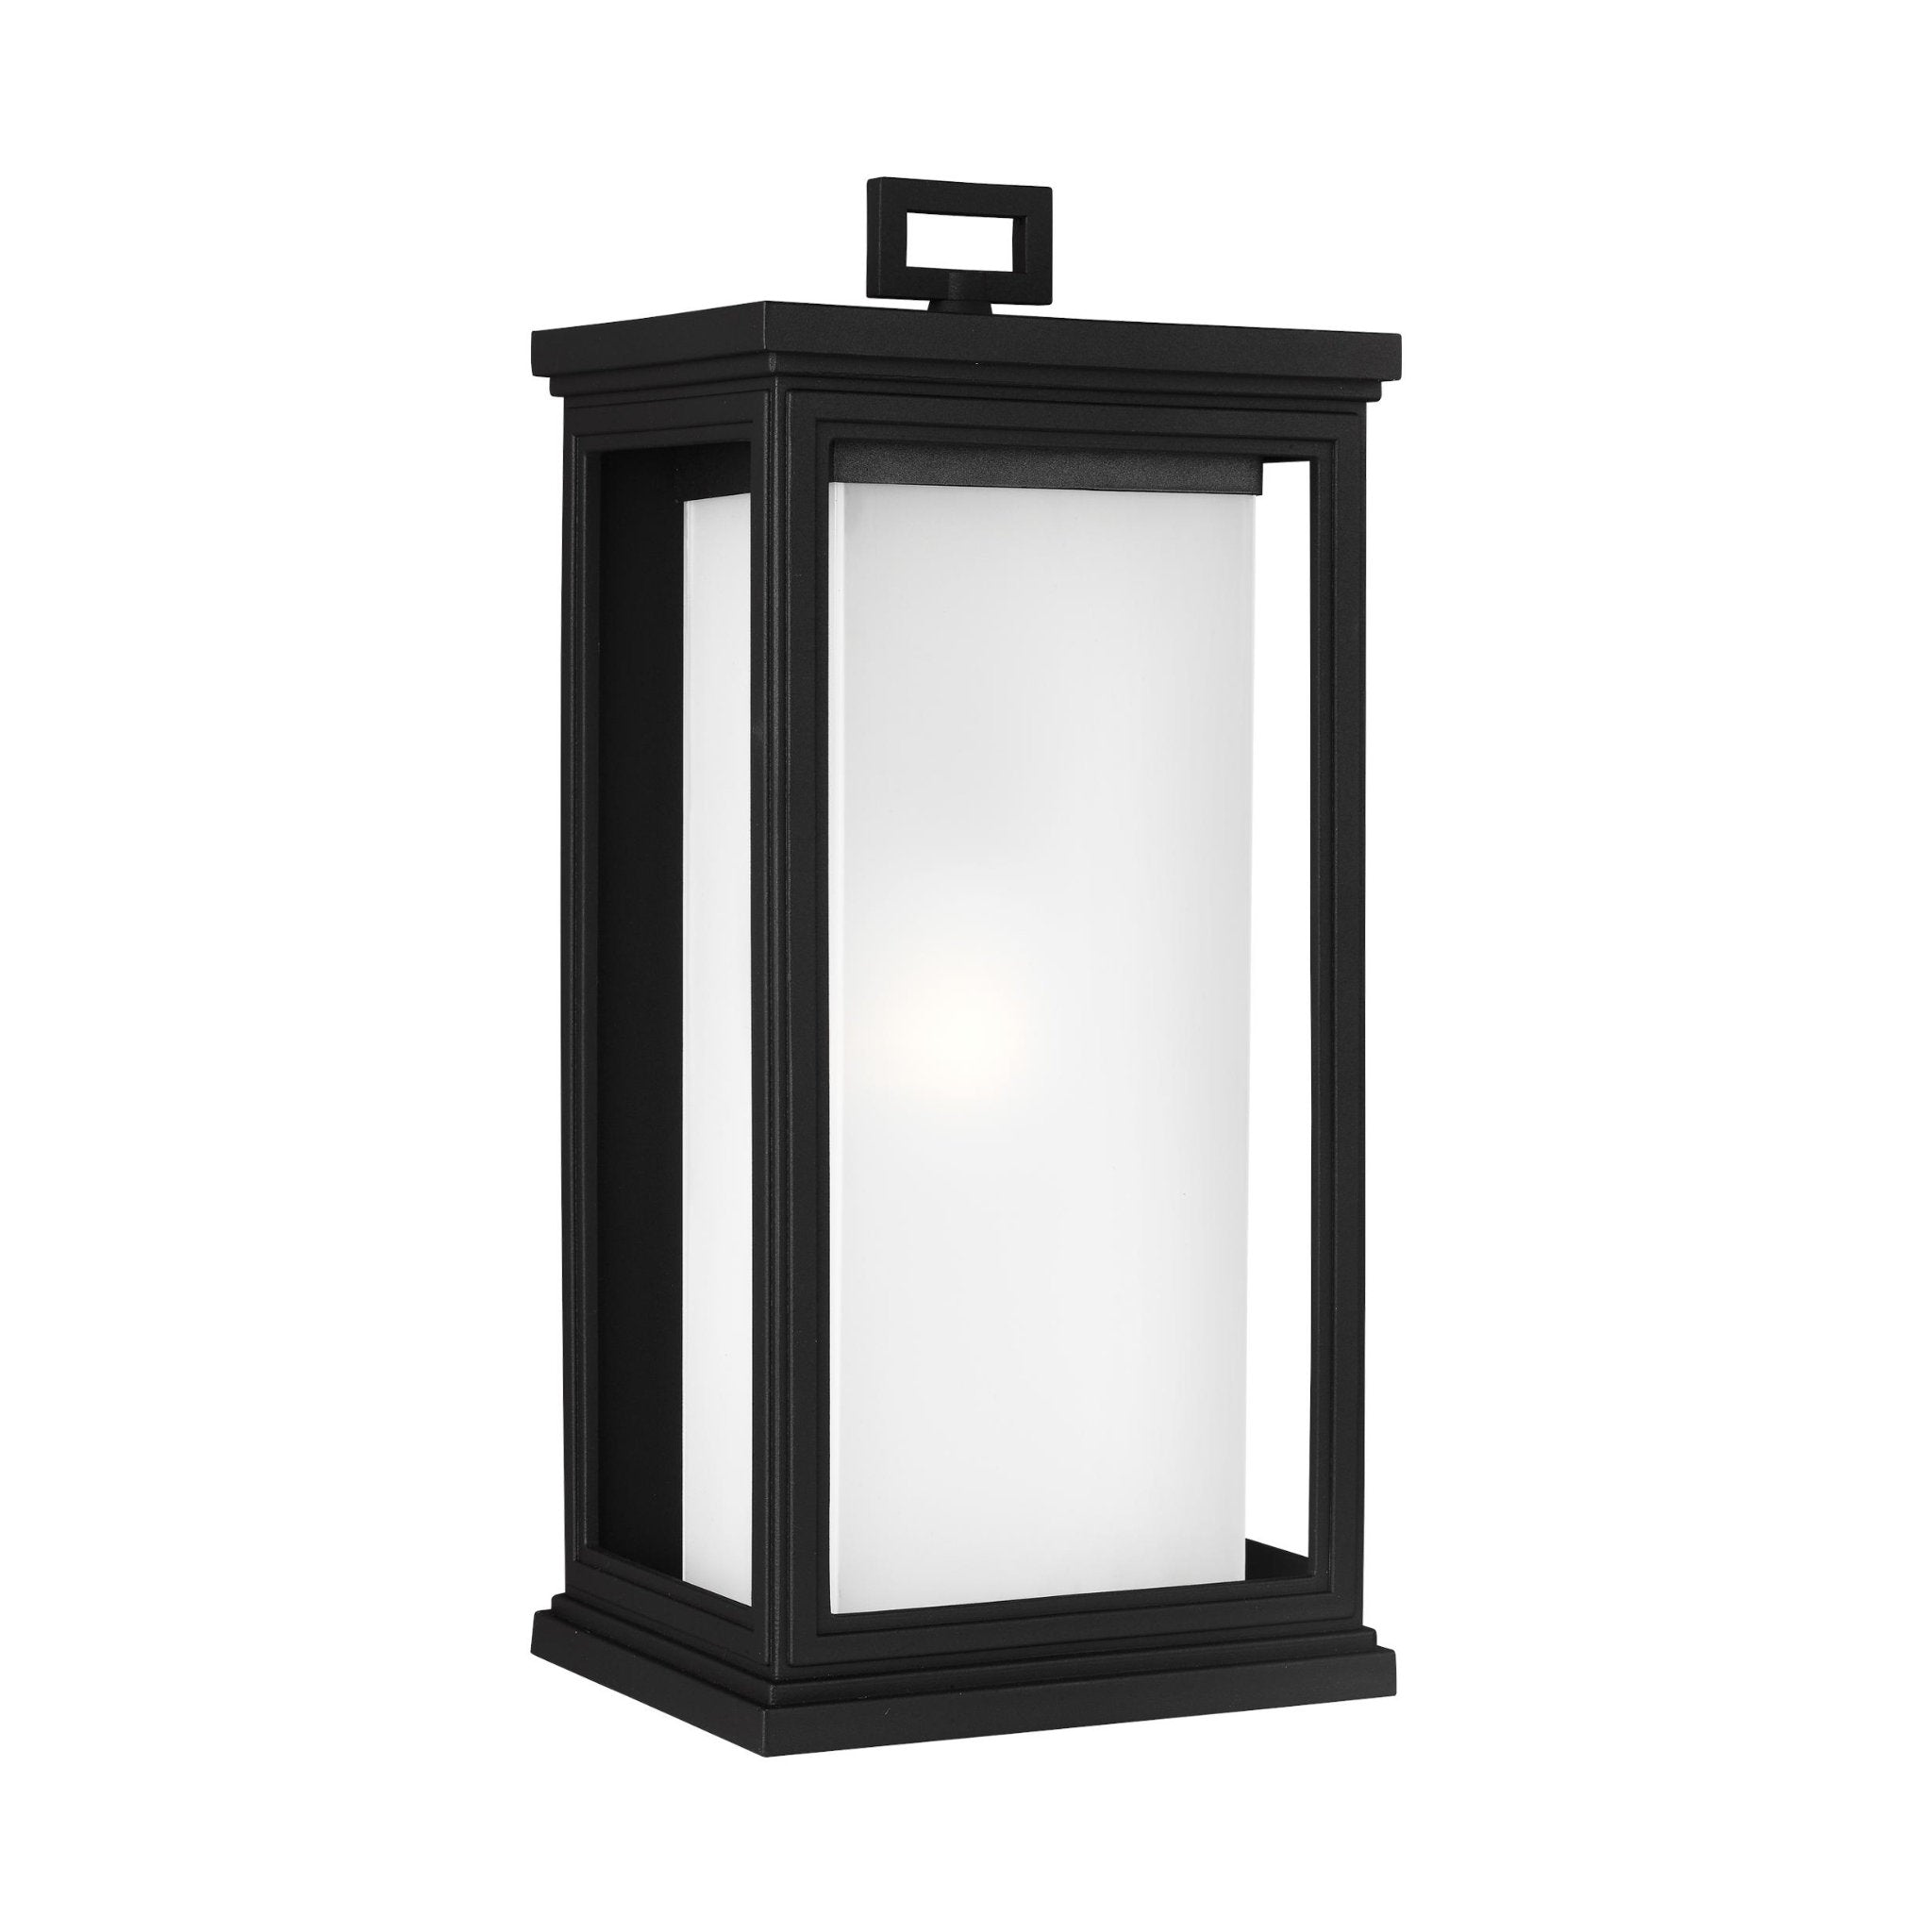 Roscoe Large Lantern Transitional Outdoor Fixture 8.5" Width 18.25" Height StoneStrong Rectangular White Opal Etched Shade in Textured Black